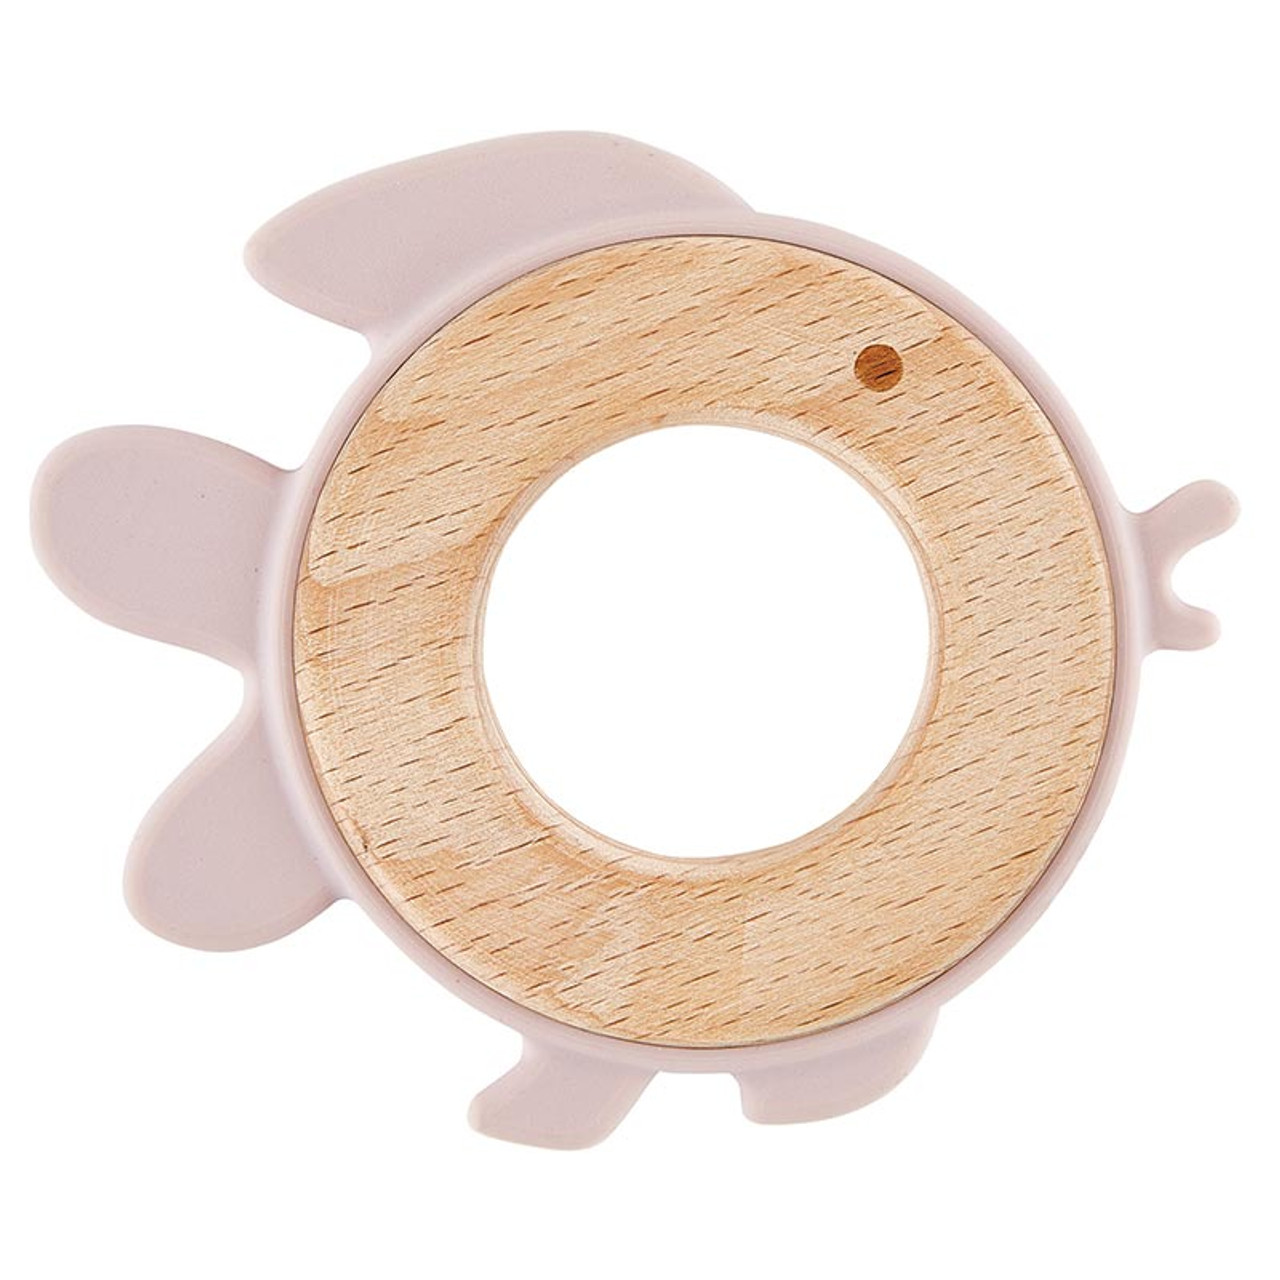 Buy Animal Silicone Teether Online | Storehouse No.9 Fish